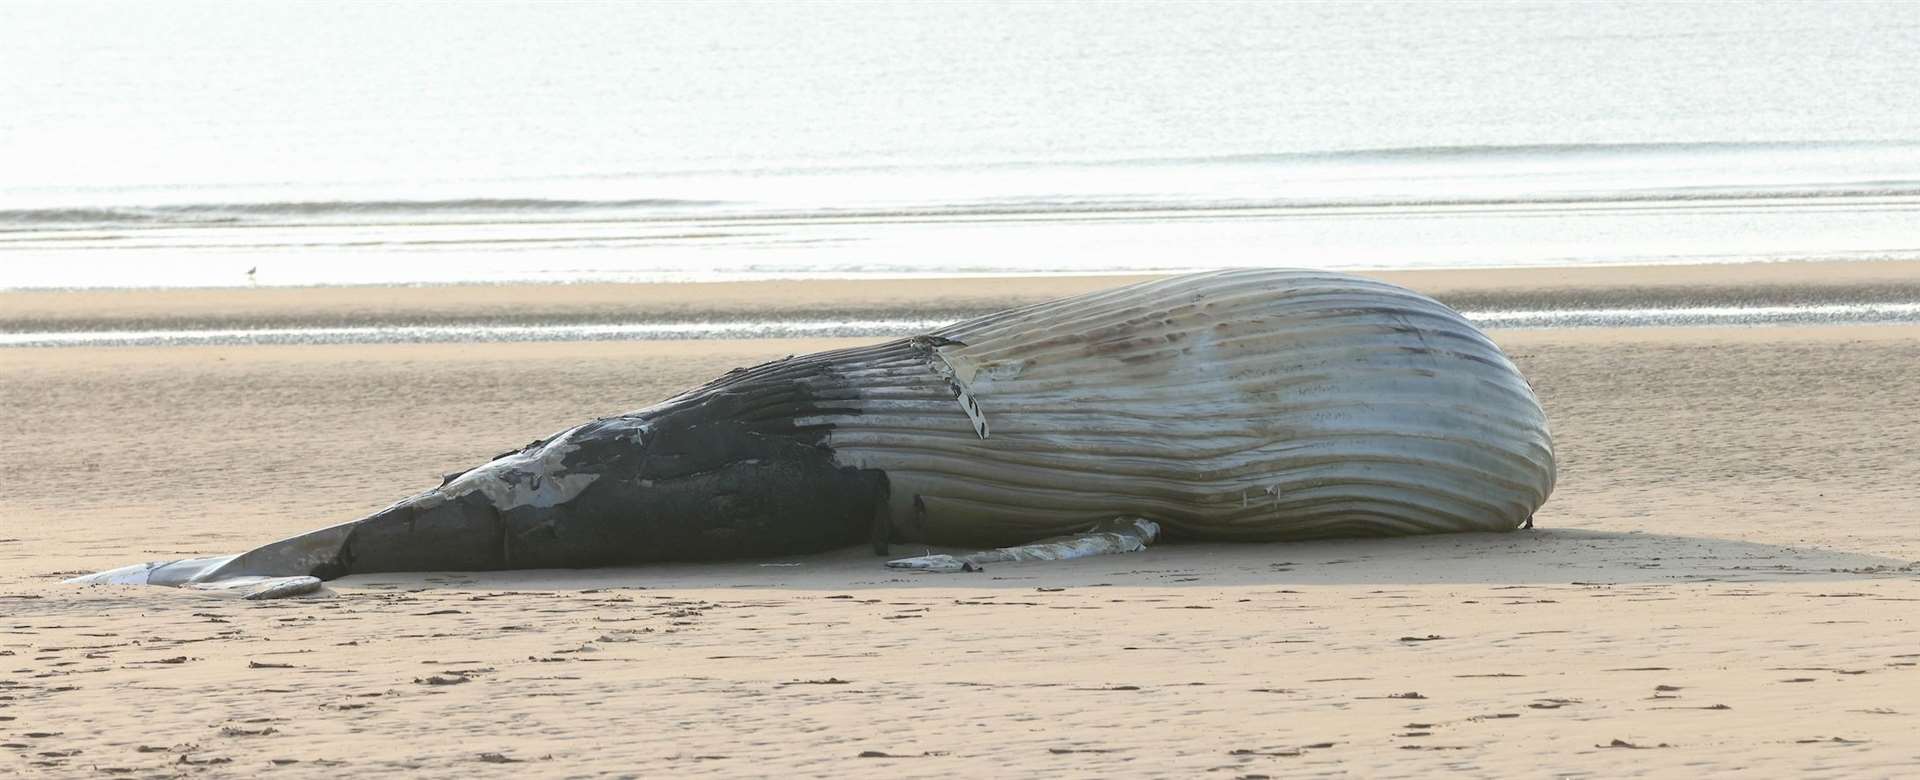 The whale was found yesterday evening. Picture: UKNIP